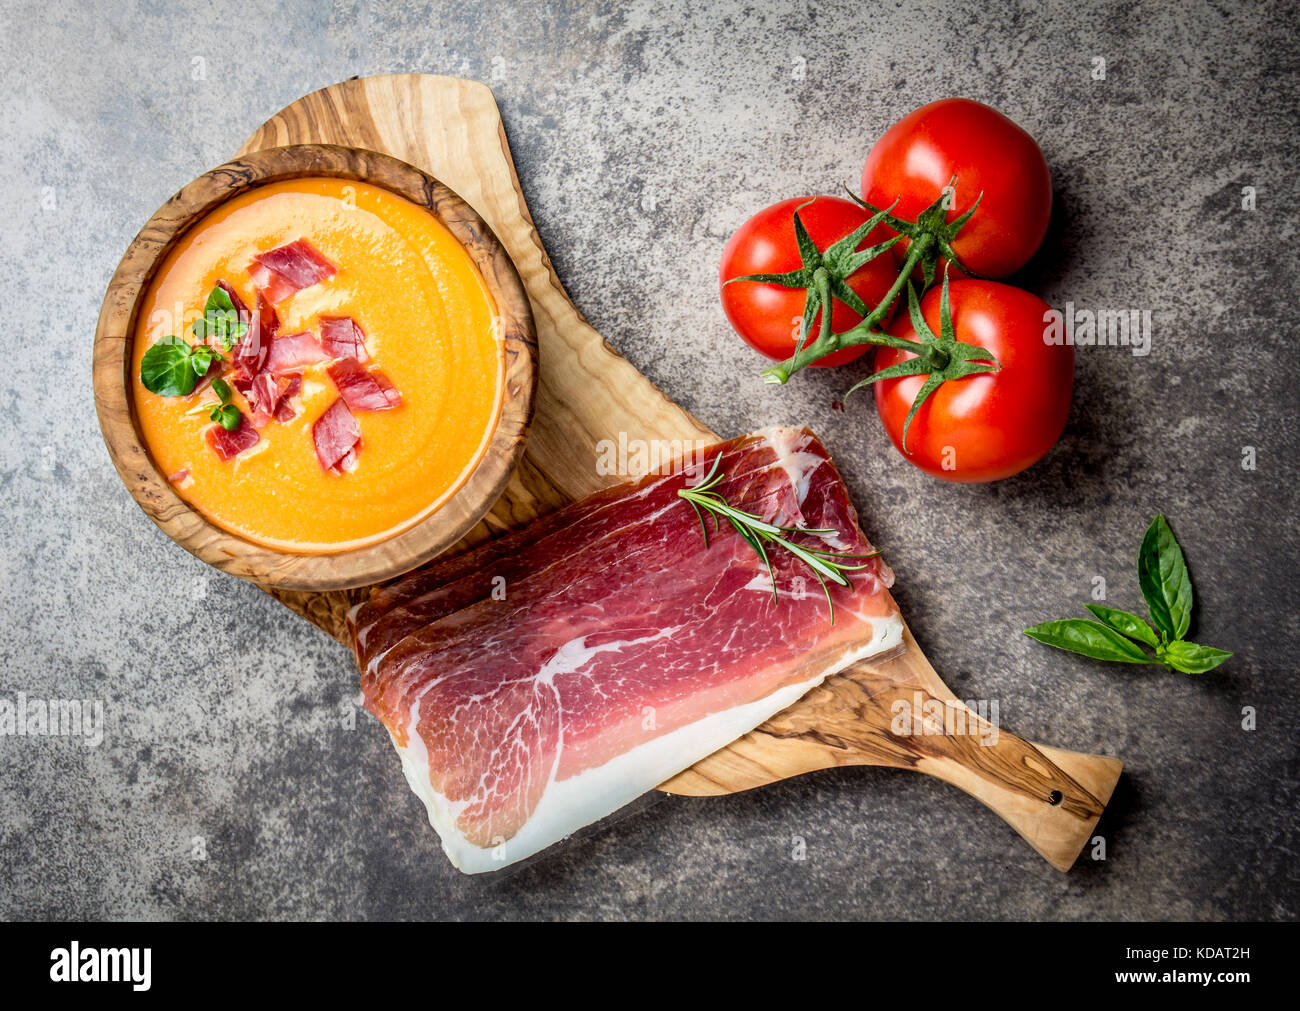 Spanish tomato soup Salmorejo served in olive wooden bowl with ham jamon serrano on stone background. Top view. Stock Photo